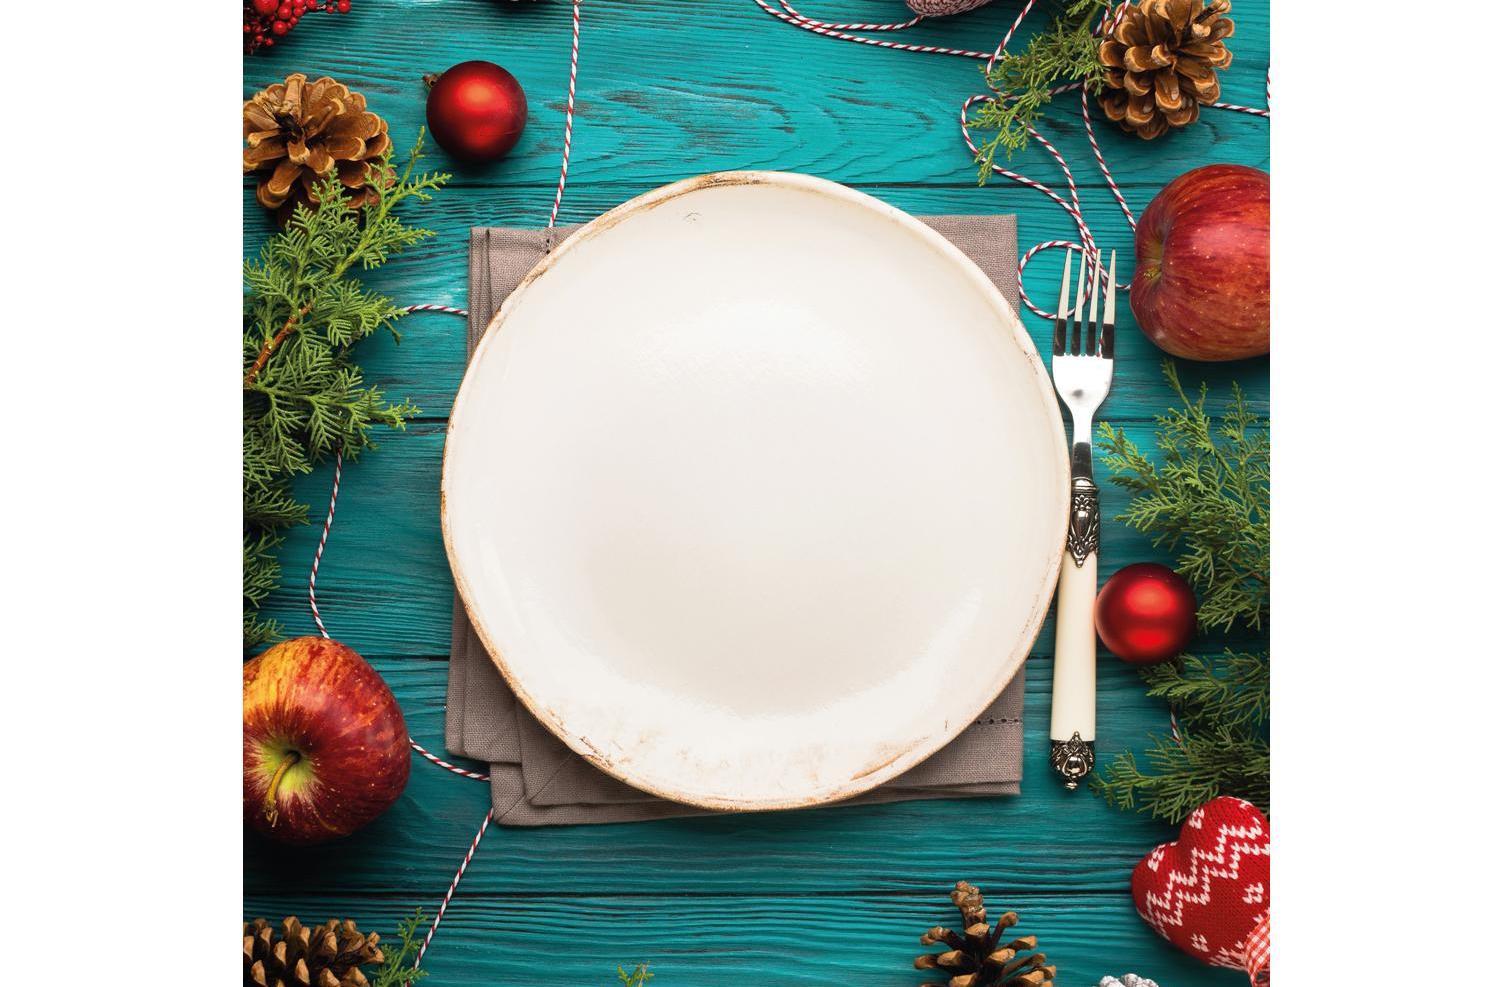 How To Make Good Food Choices This Christmas (And Enjoy It) - Health ...